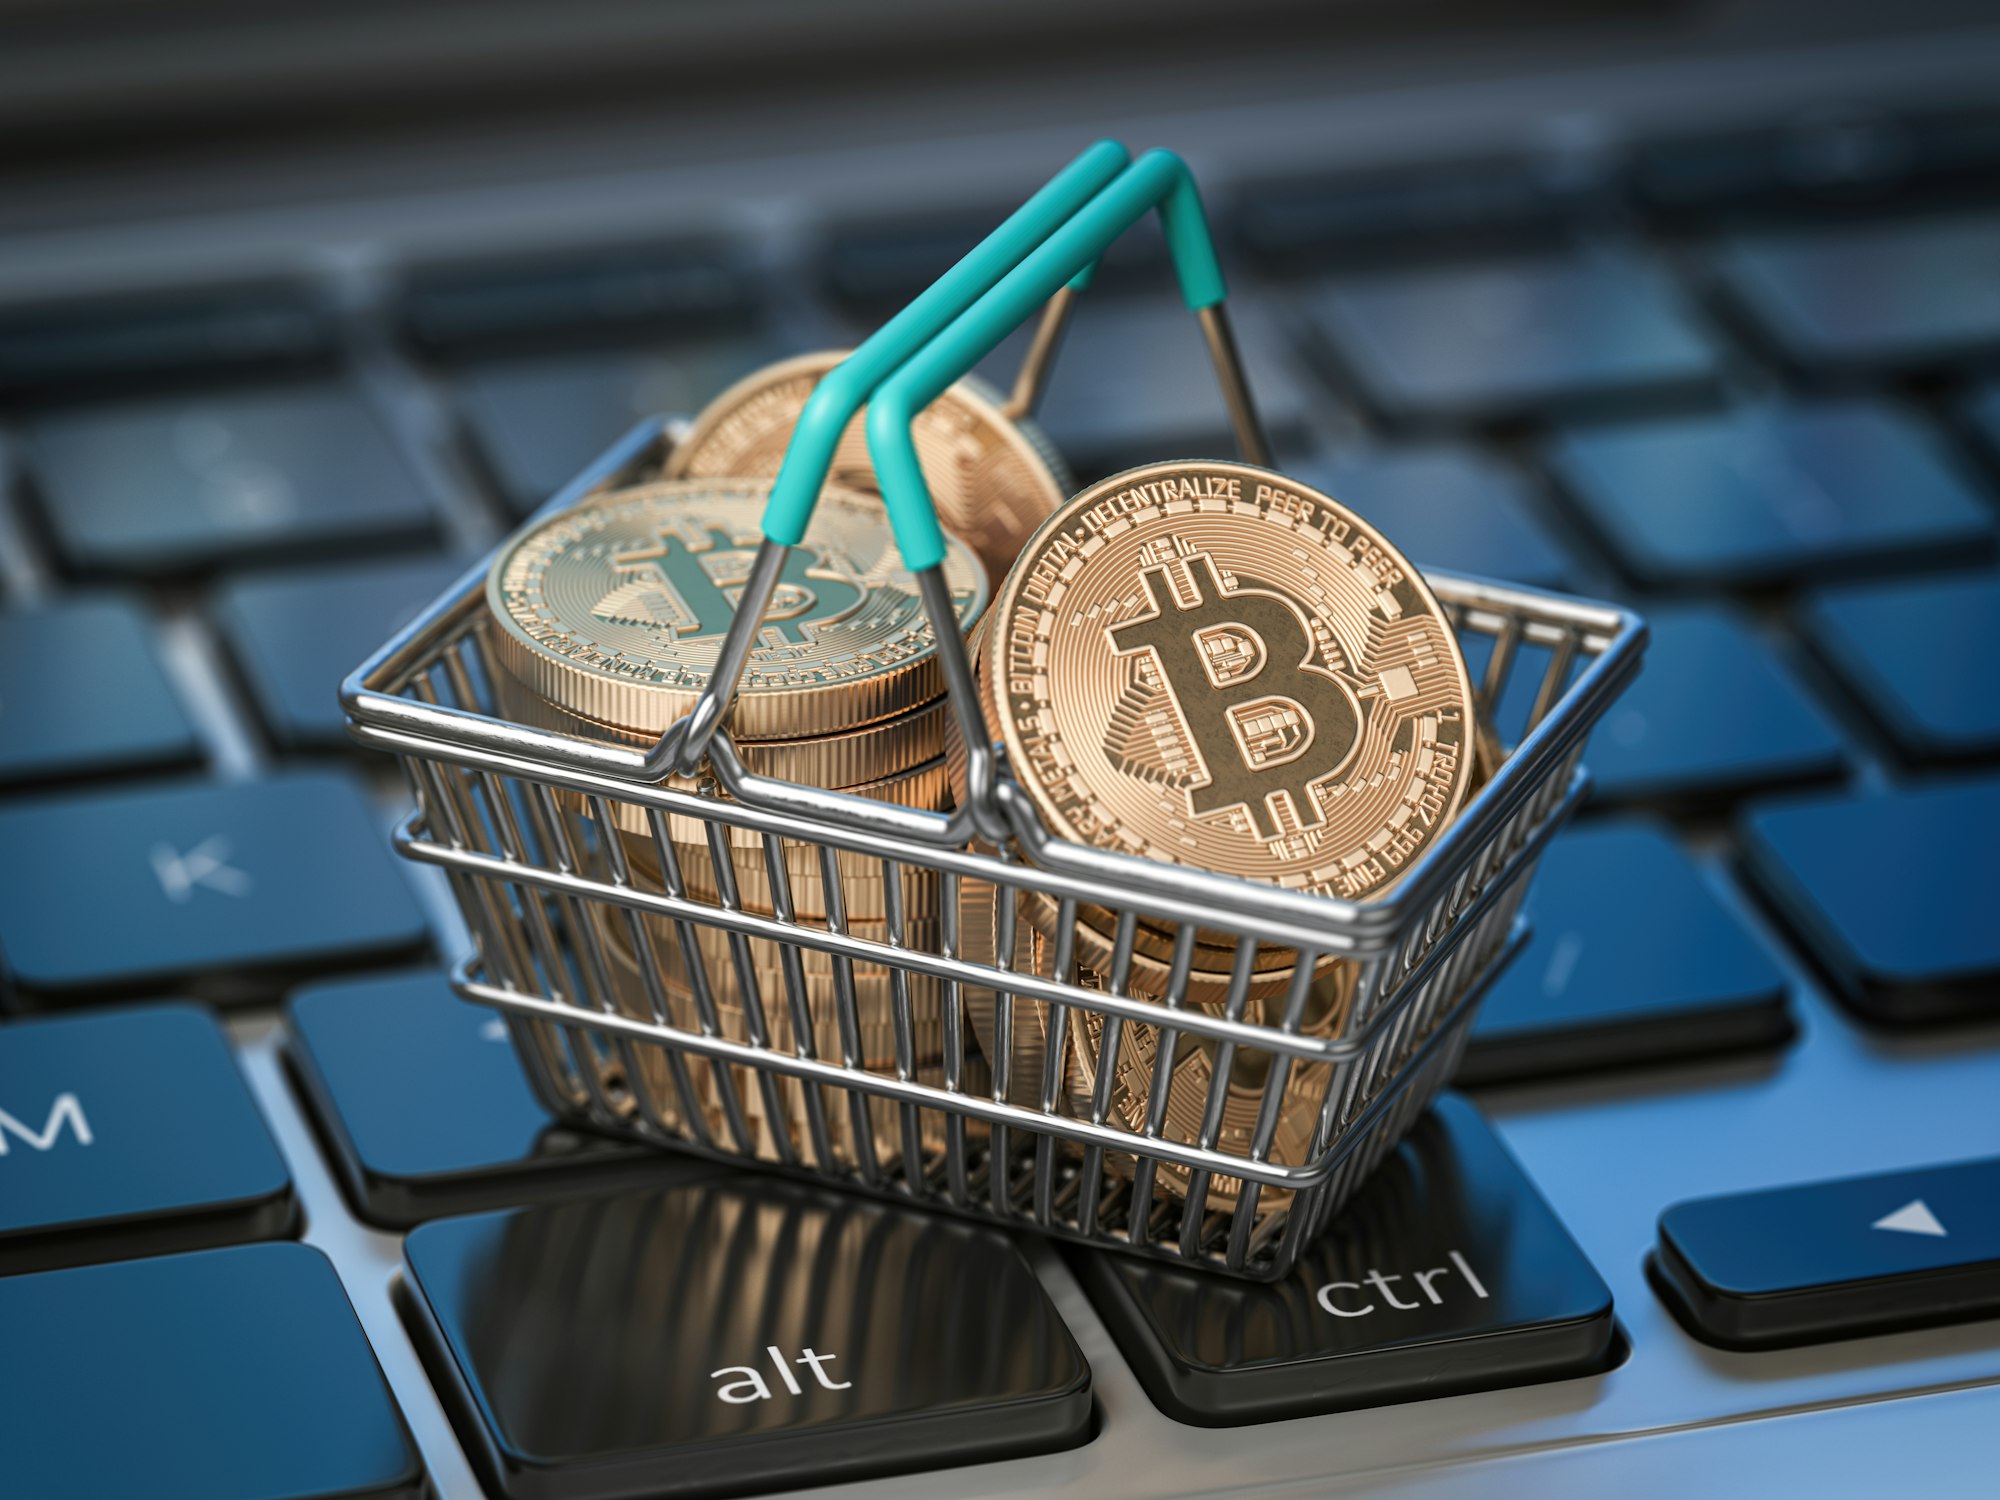 Bitcoin coins in shopping basket on laptop keyboard. Bitcoin wallet and payment.